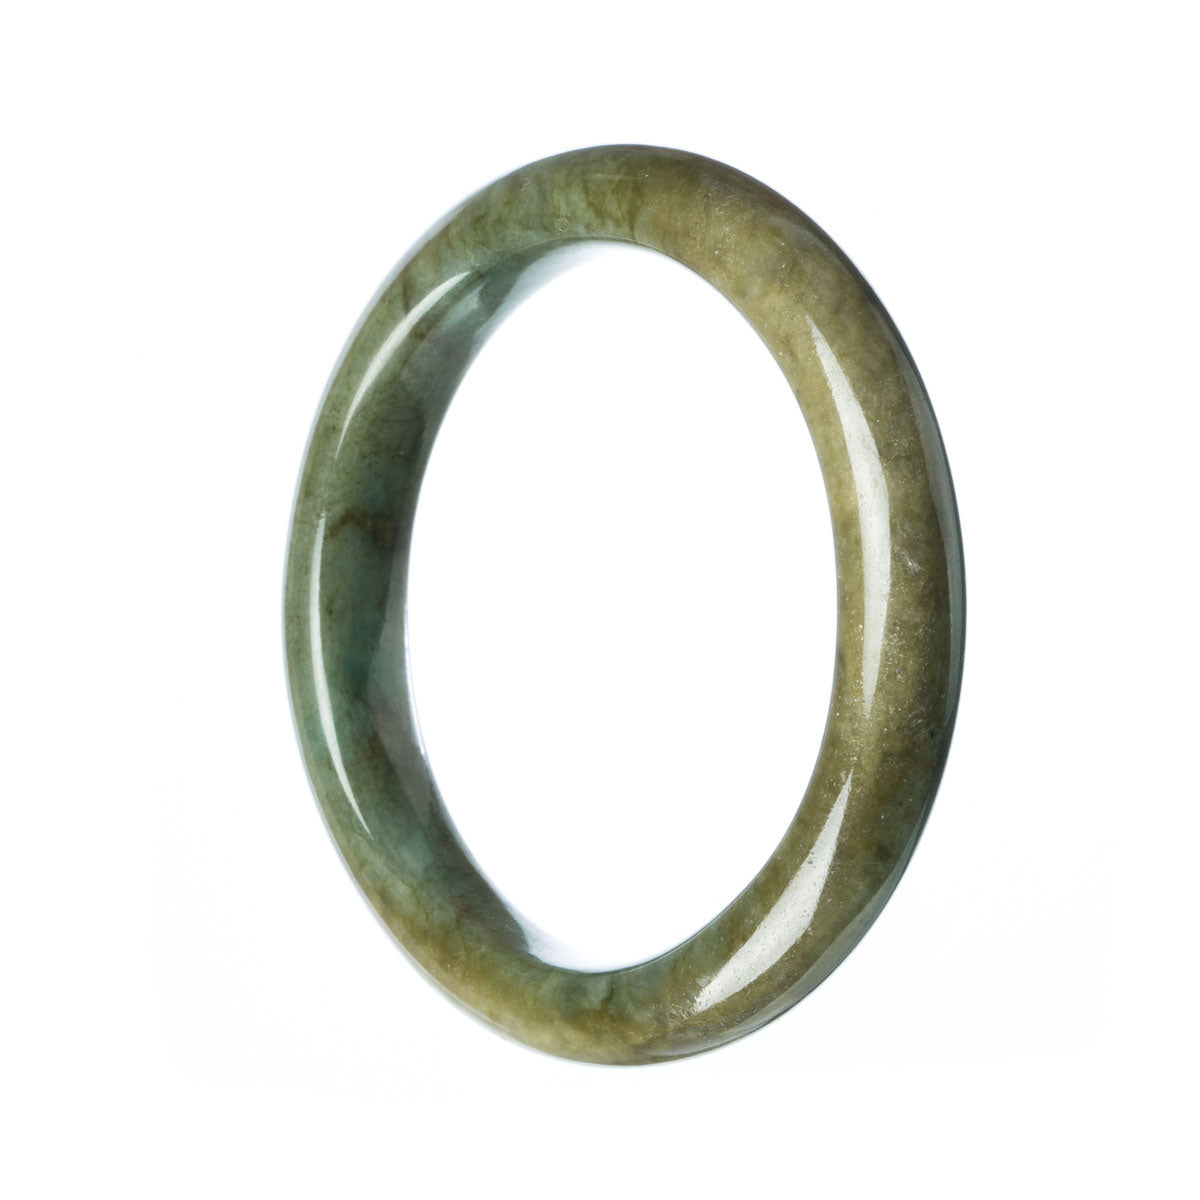 A close-up image of a Real Grade A Dark Green Burma Jade Bangle. The bangle is 59mm in size and has a semi-round shape. It is a beautiful piece of jewelry made from genuine jade.